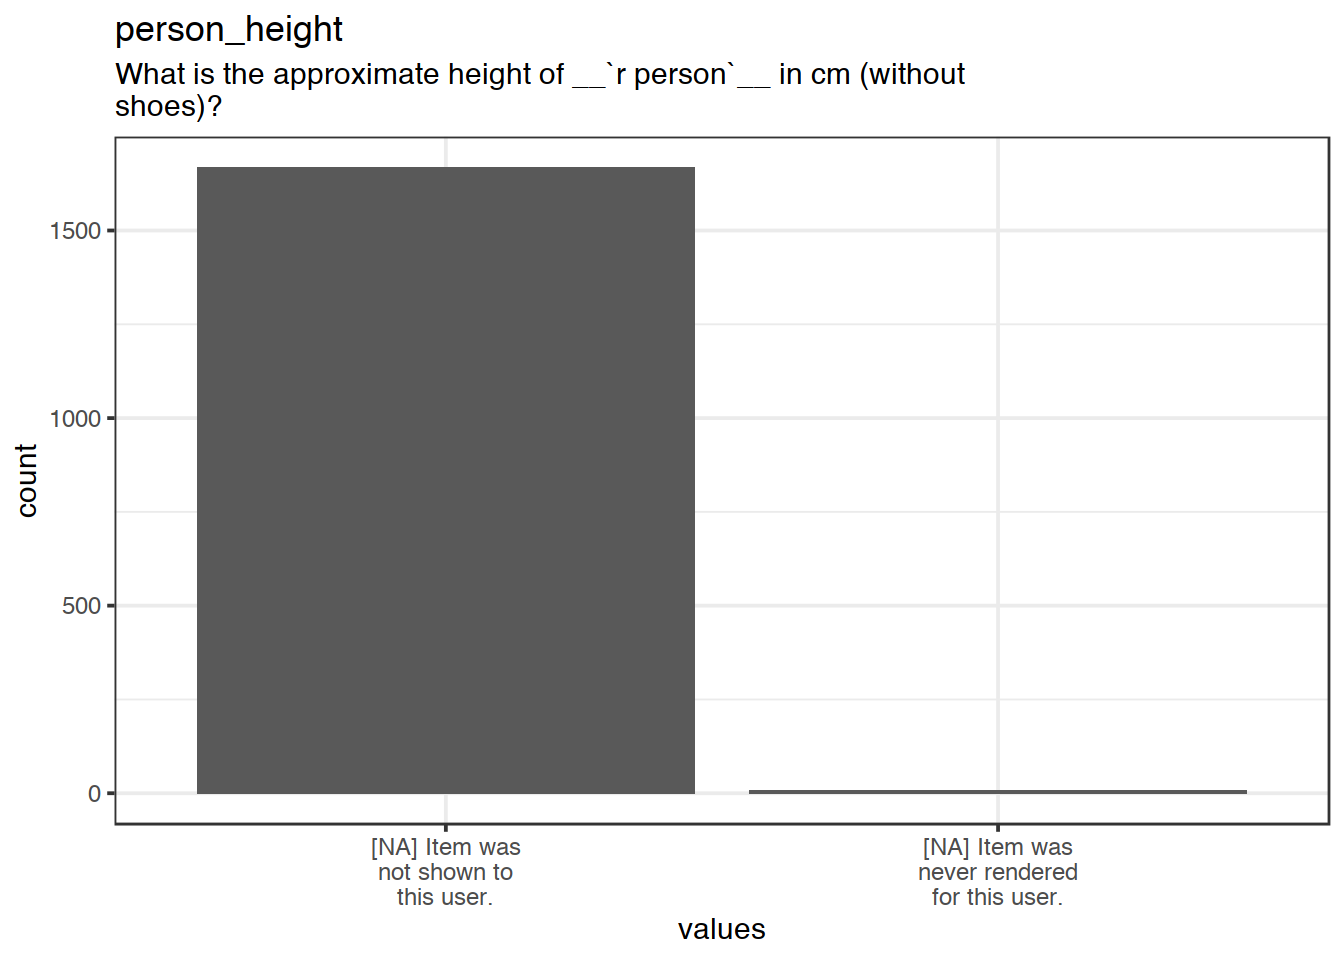 Plot of missing values for person_height